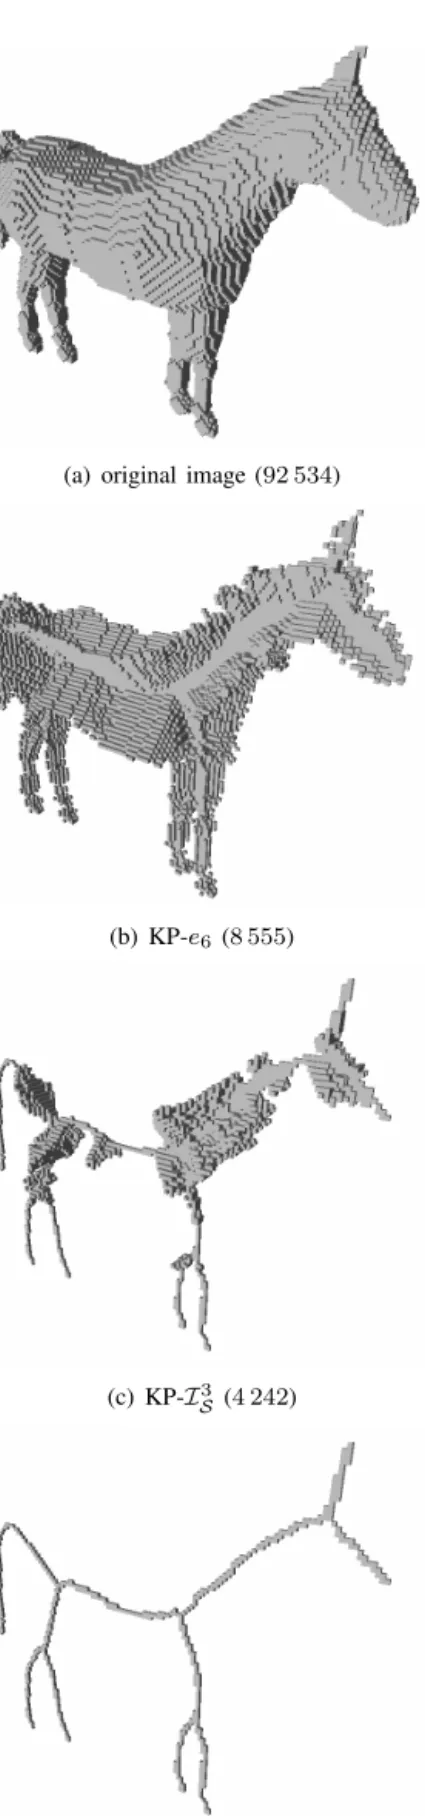 Fig. 4. A 140×140 ×50 image of a horse (a), its medial surfaces produced by algorithm KP- e 6 [7] (b) and by algorithm KP- I 3